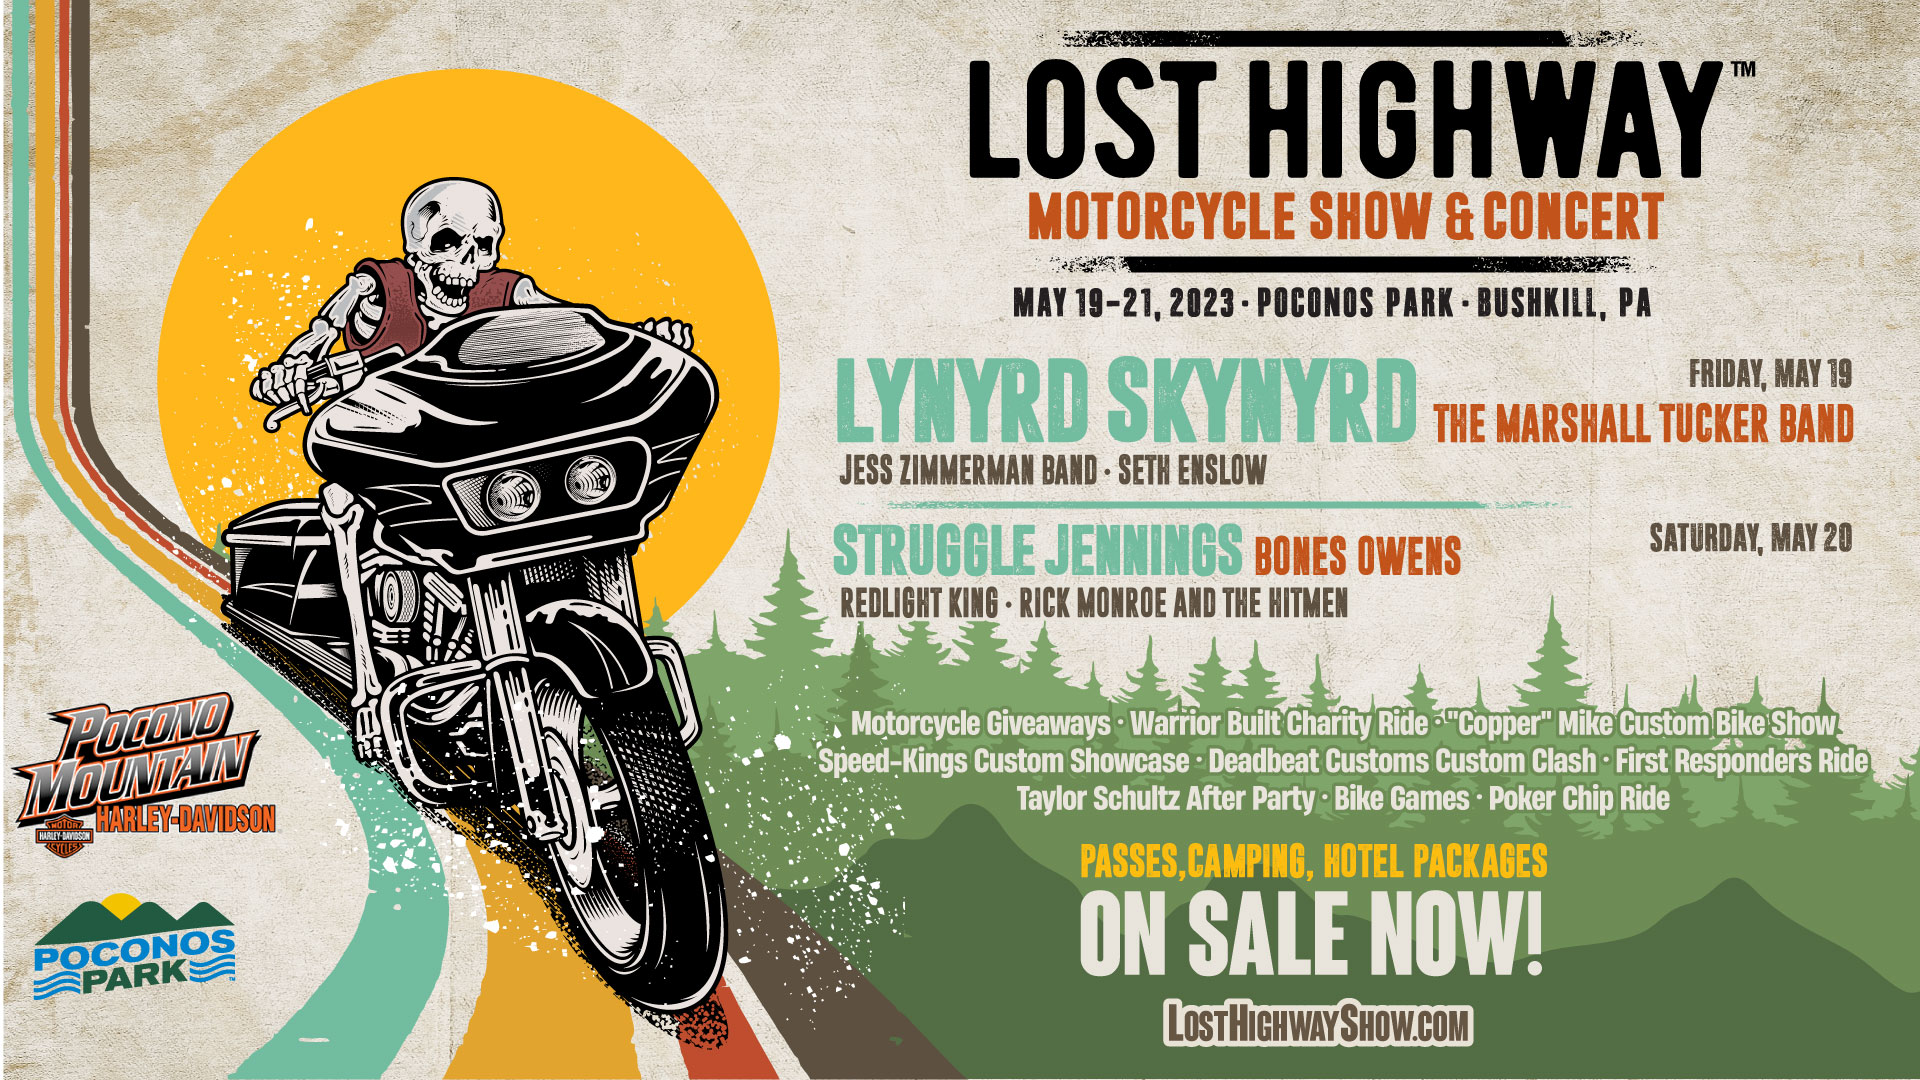 Lost Highway Motorcycle Show & Concert - Bushkill, PA - 05/19/2023